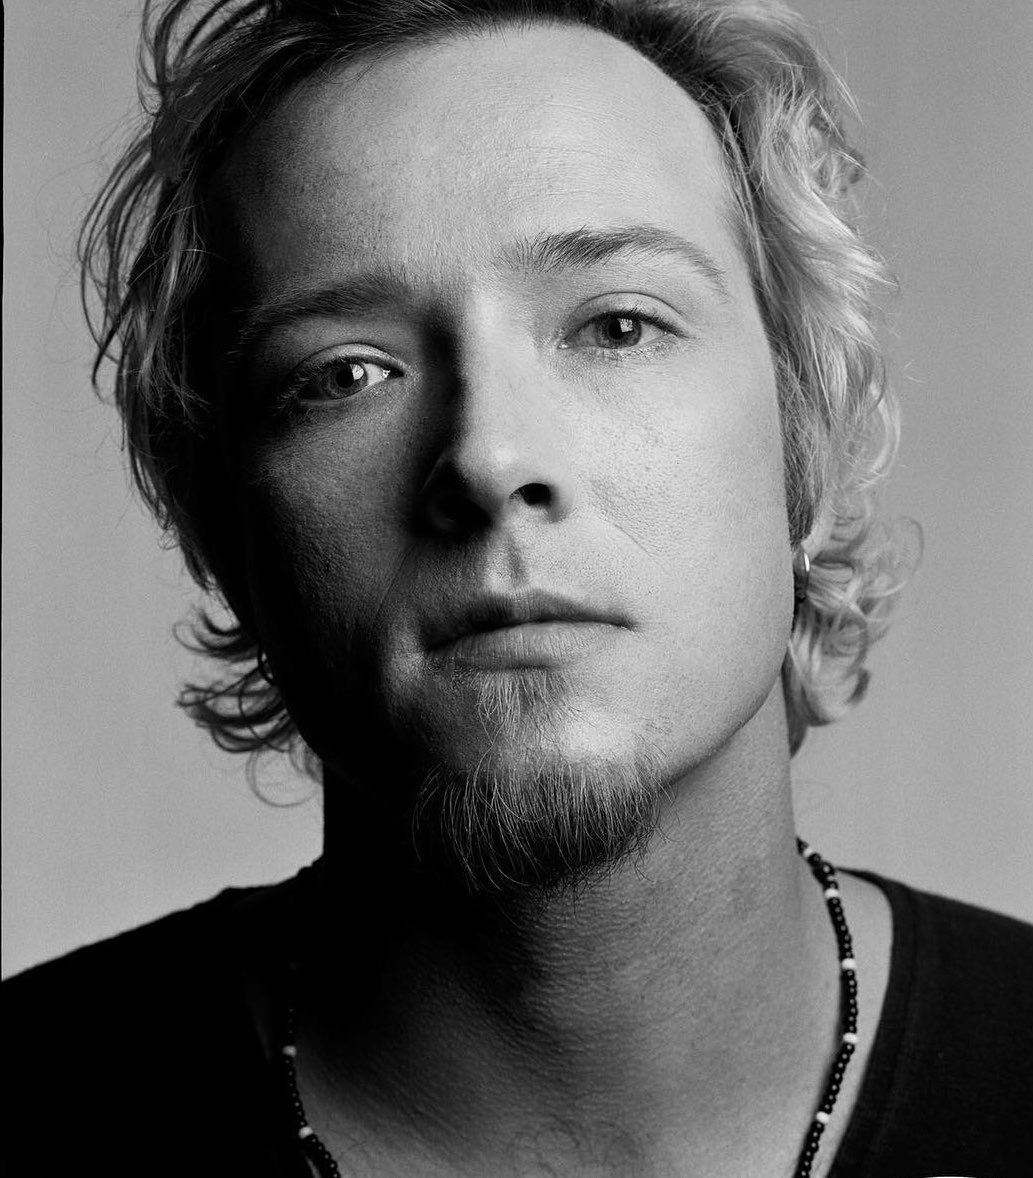 Happy Birthday to Scott Weiland who would have been 50 today!   